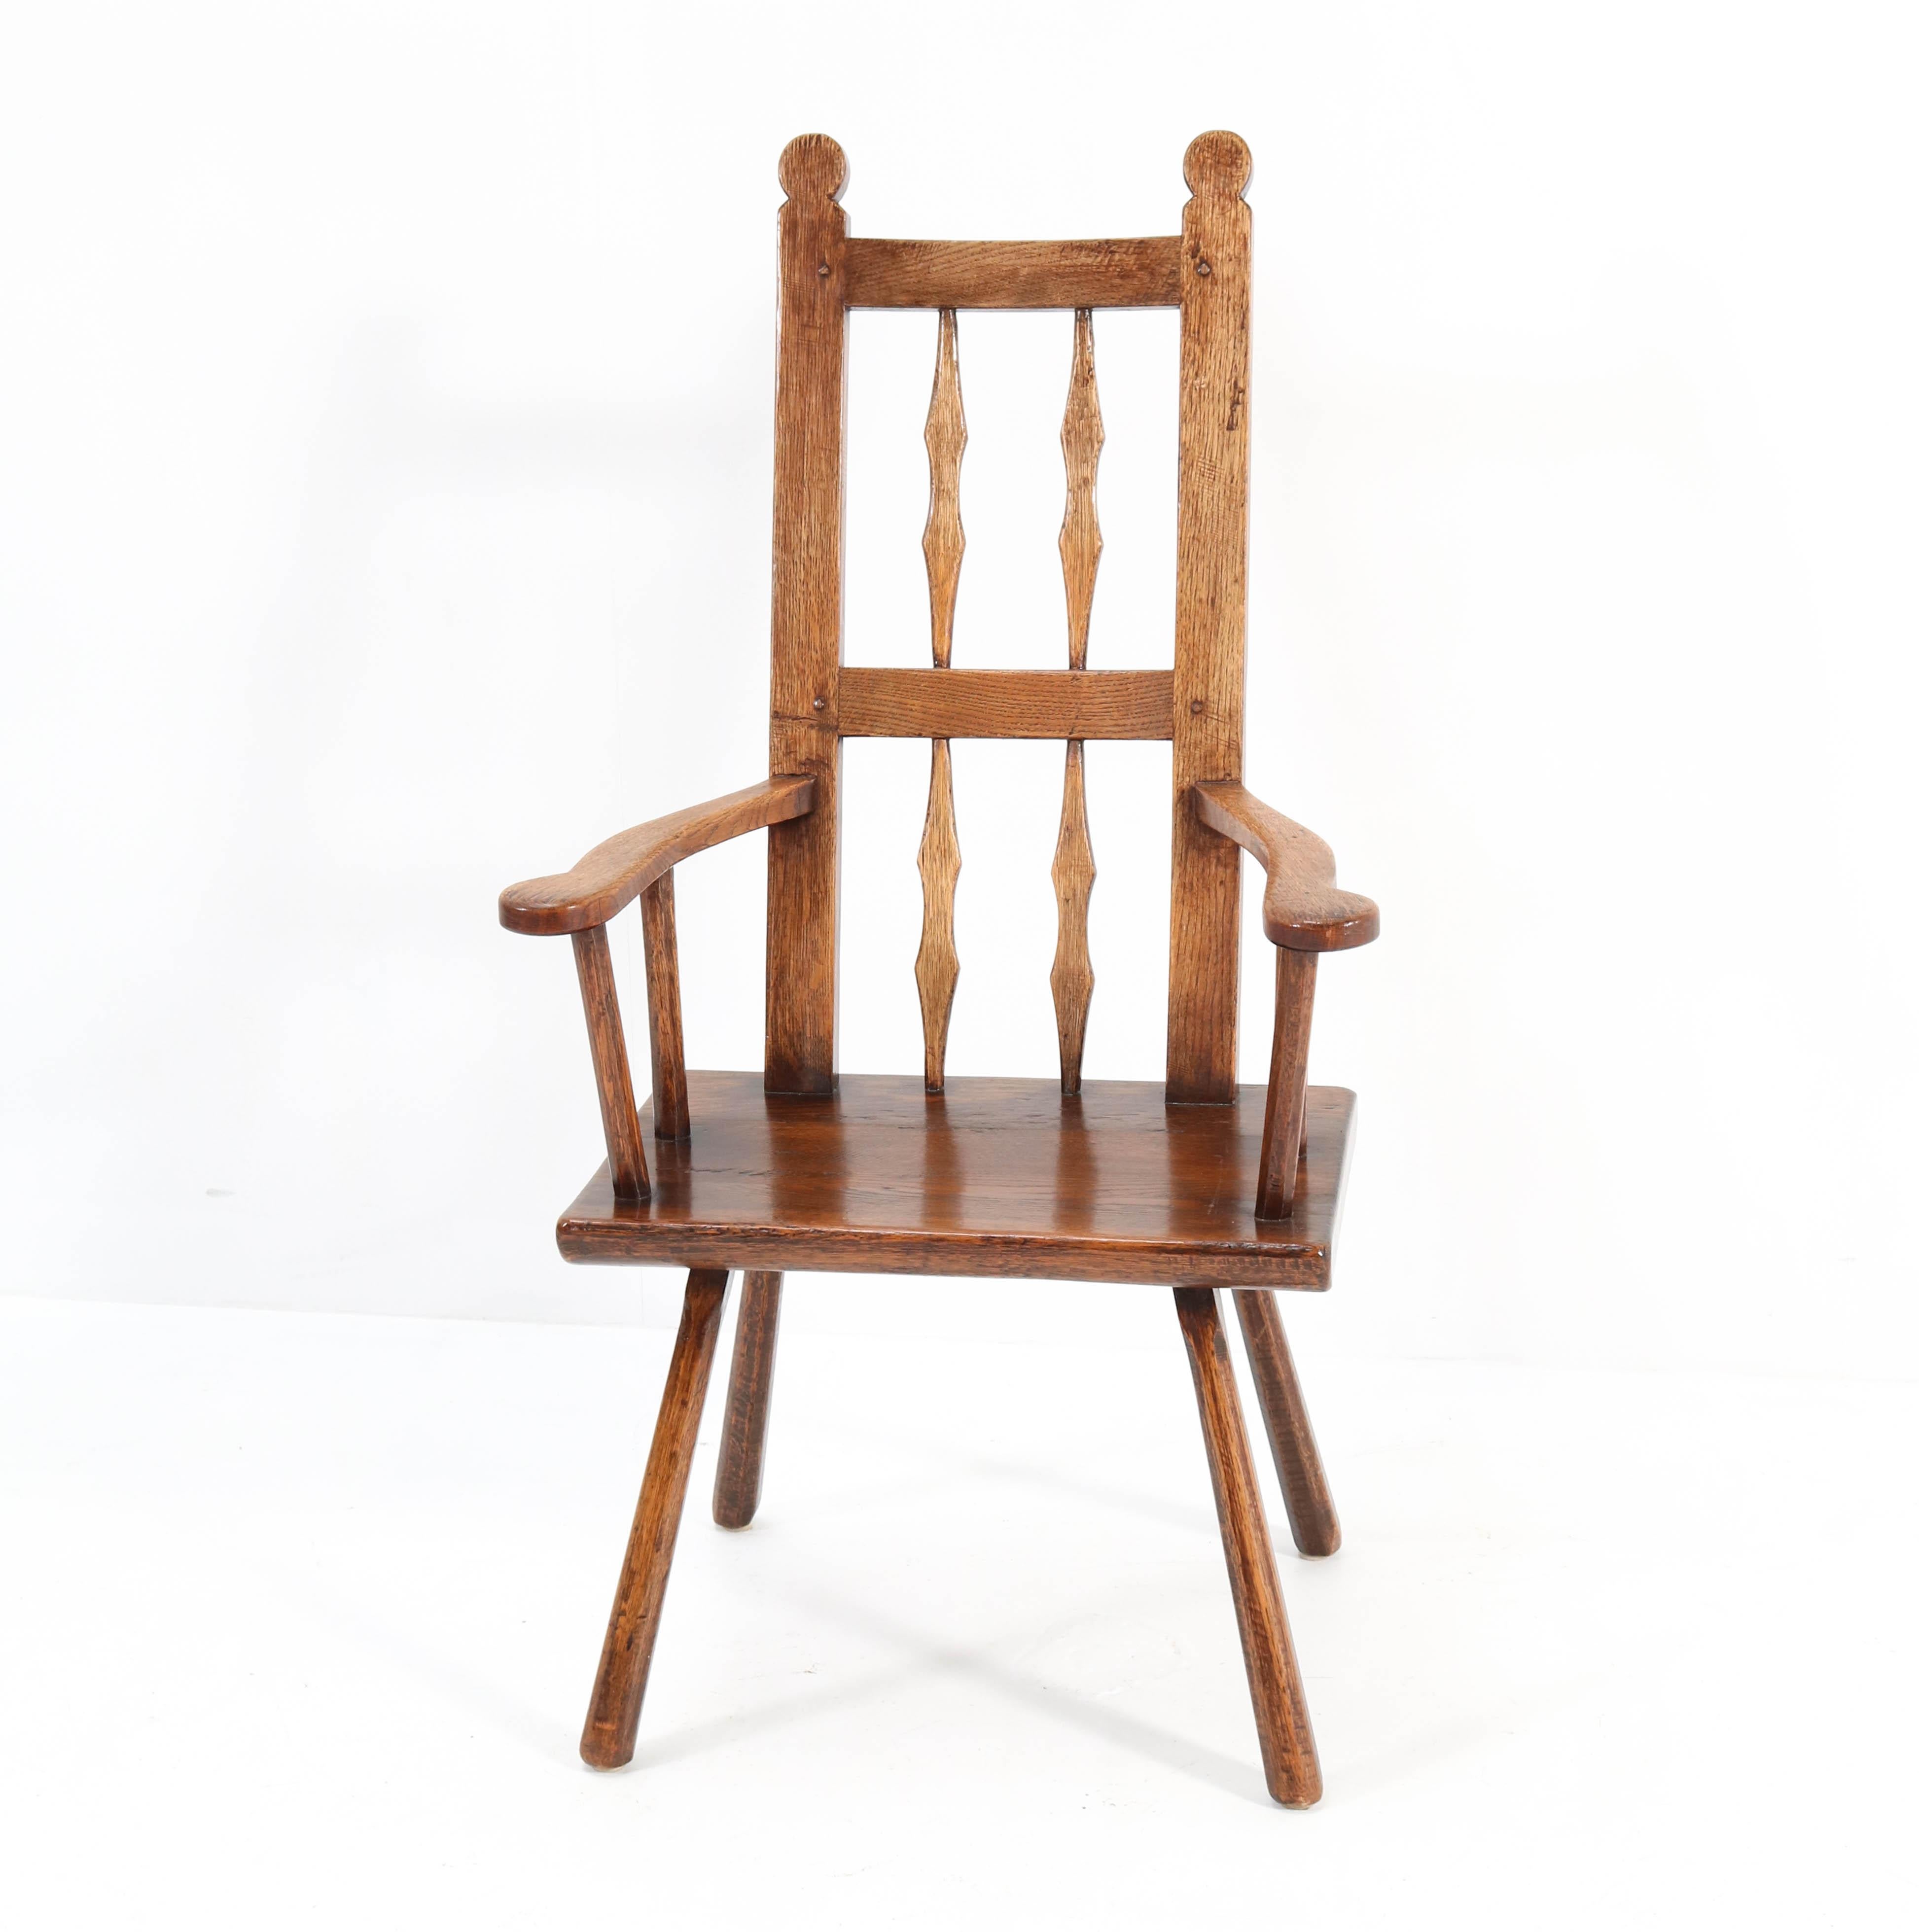 Wonderful and rare Country armchair.
Striking English design from the 1900s.
Solid oak.
In very good condition with a beautiful patina.